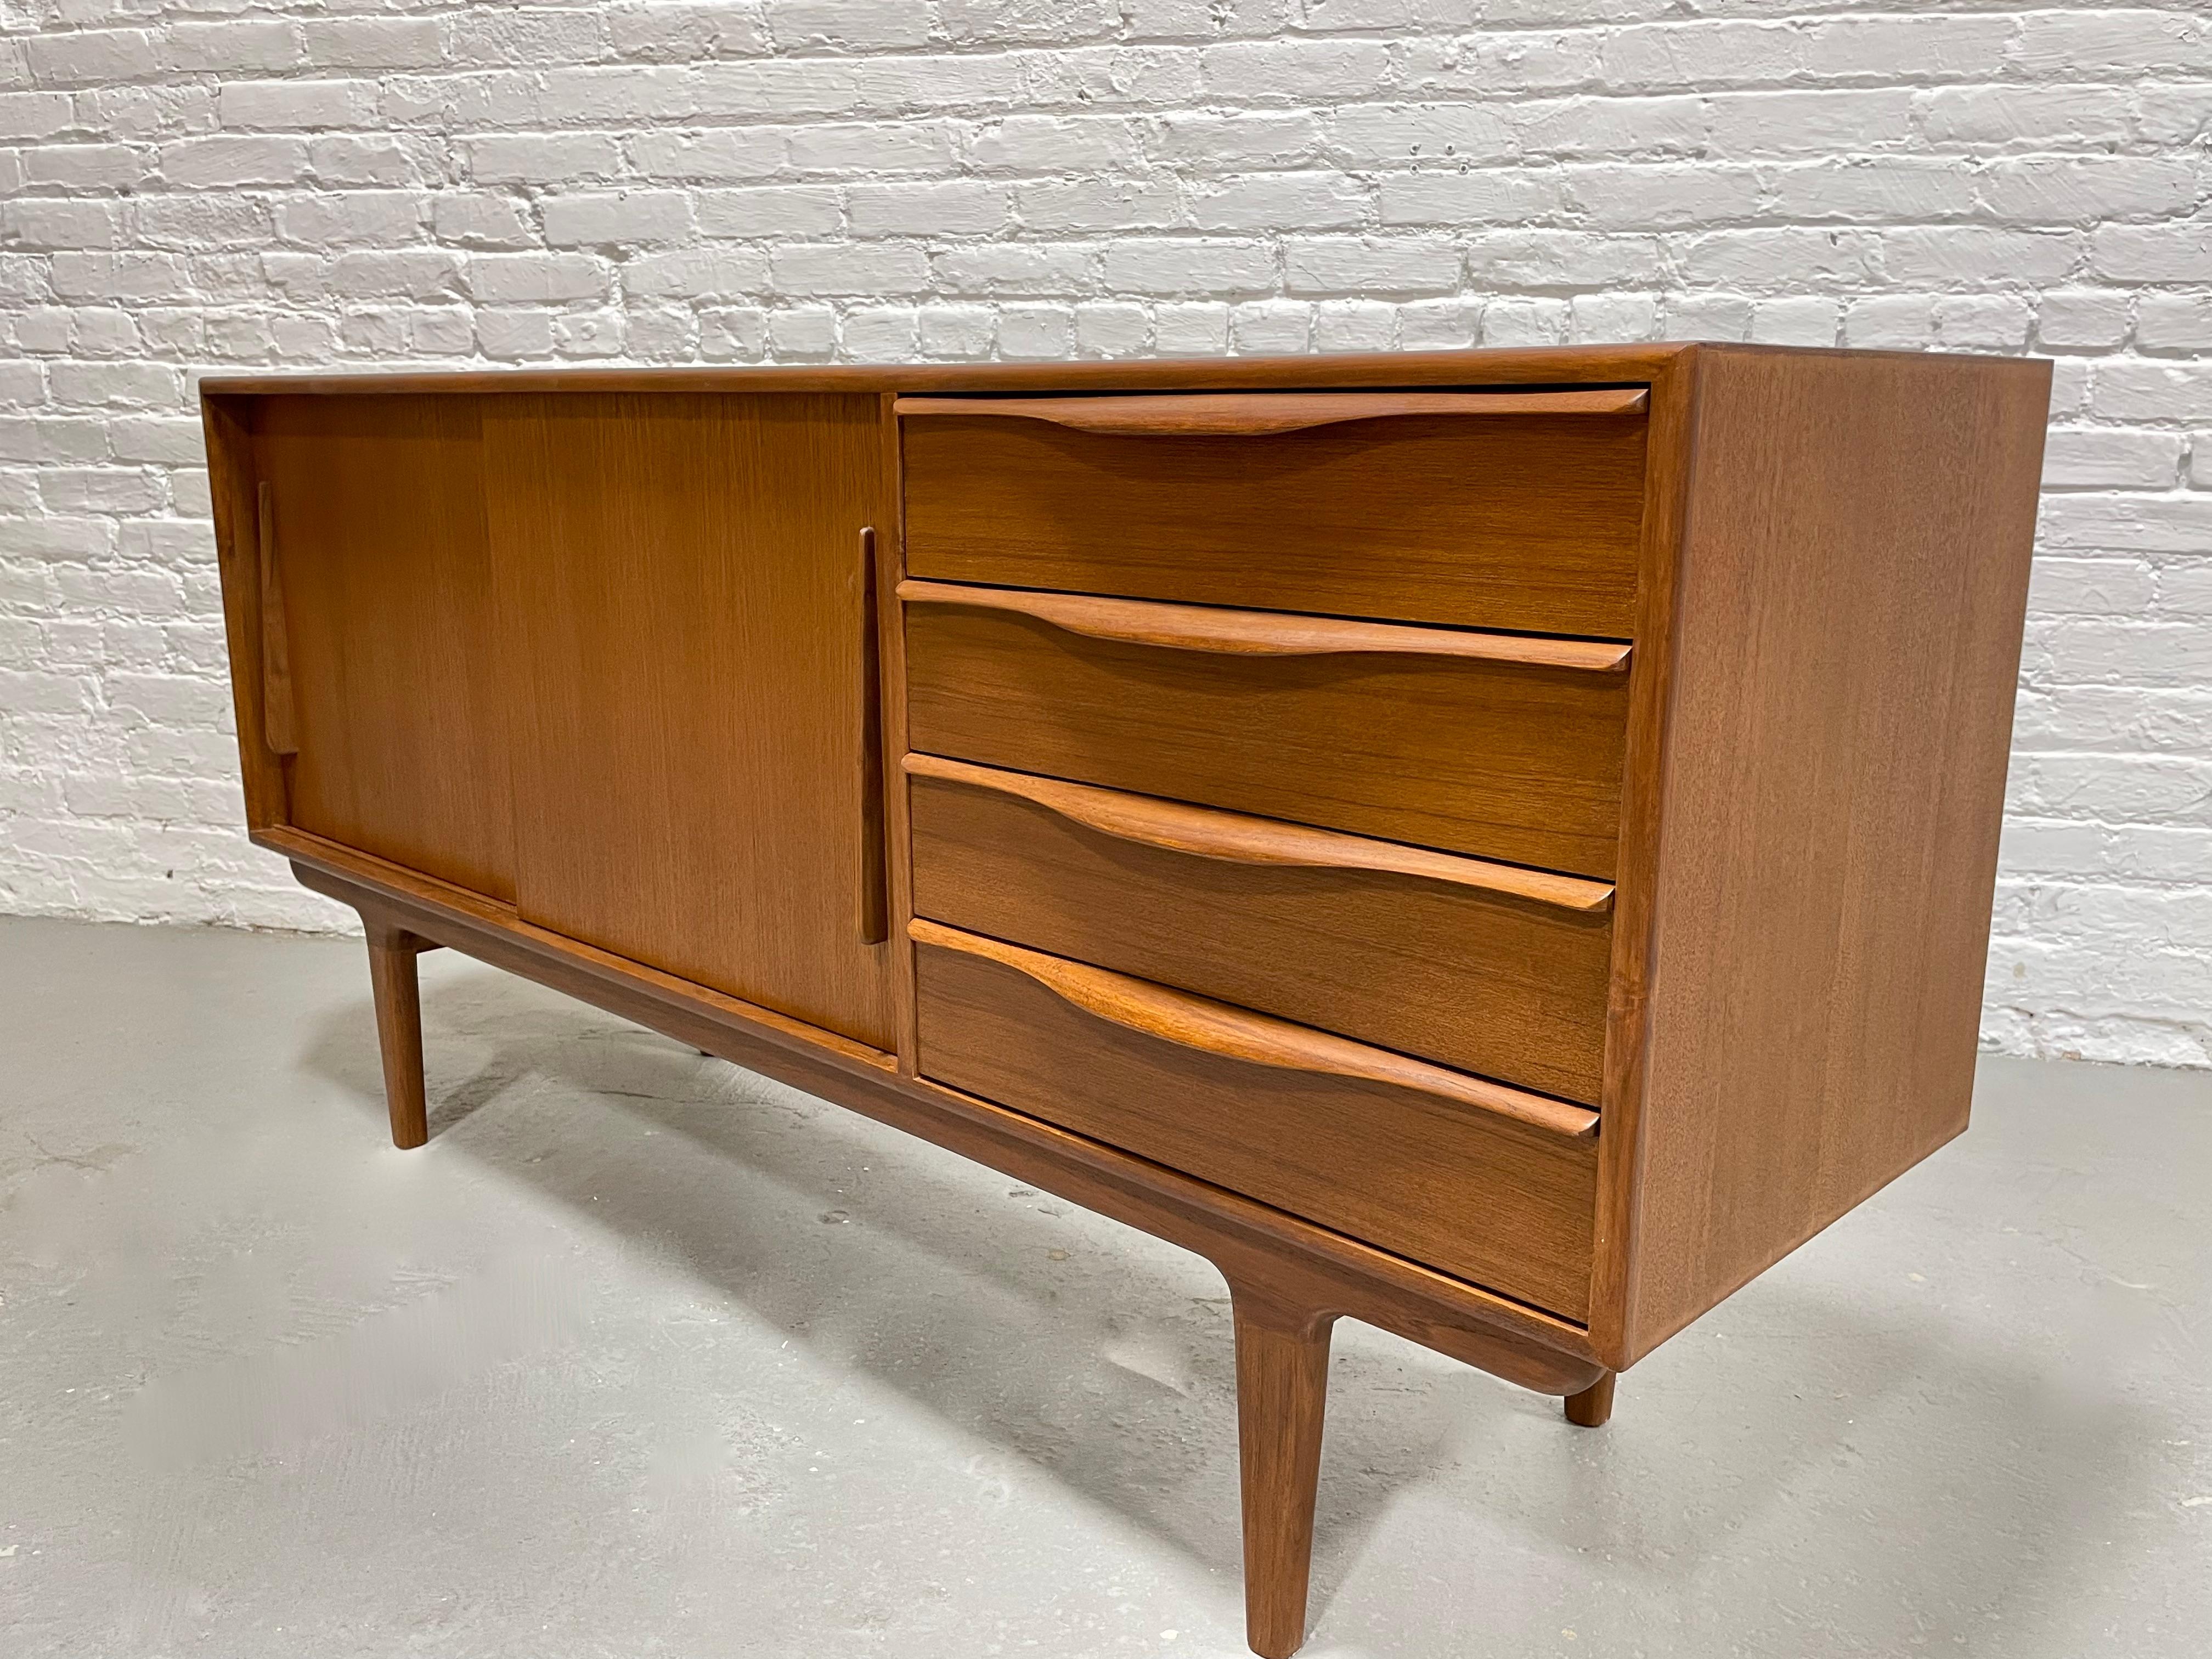 Sculptural Mid-Century Modern Styled Credenza / Media Stand / Sideboard For Sale 2